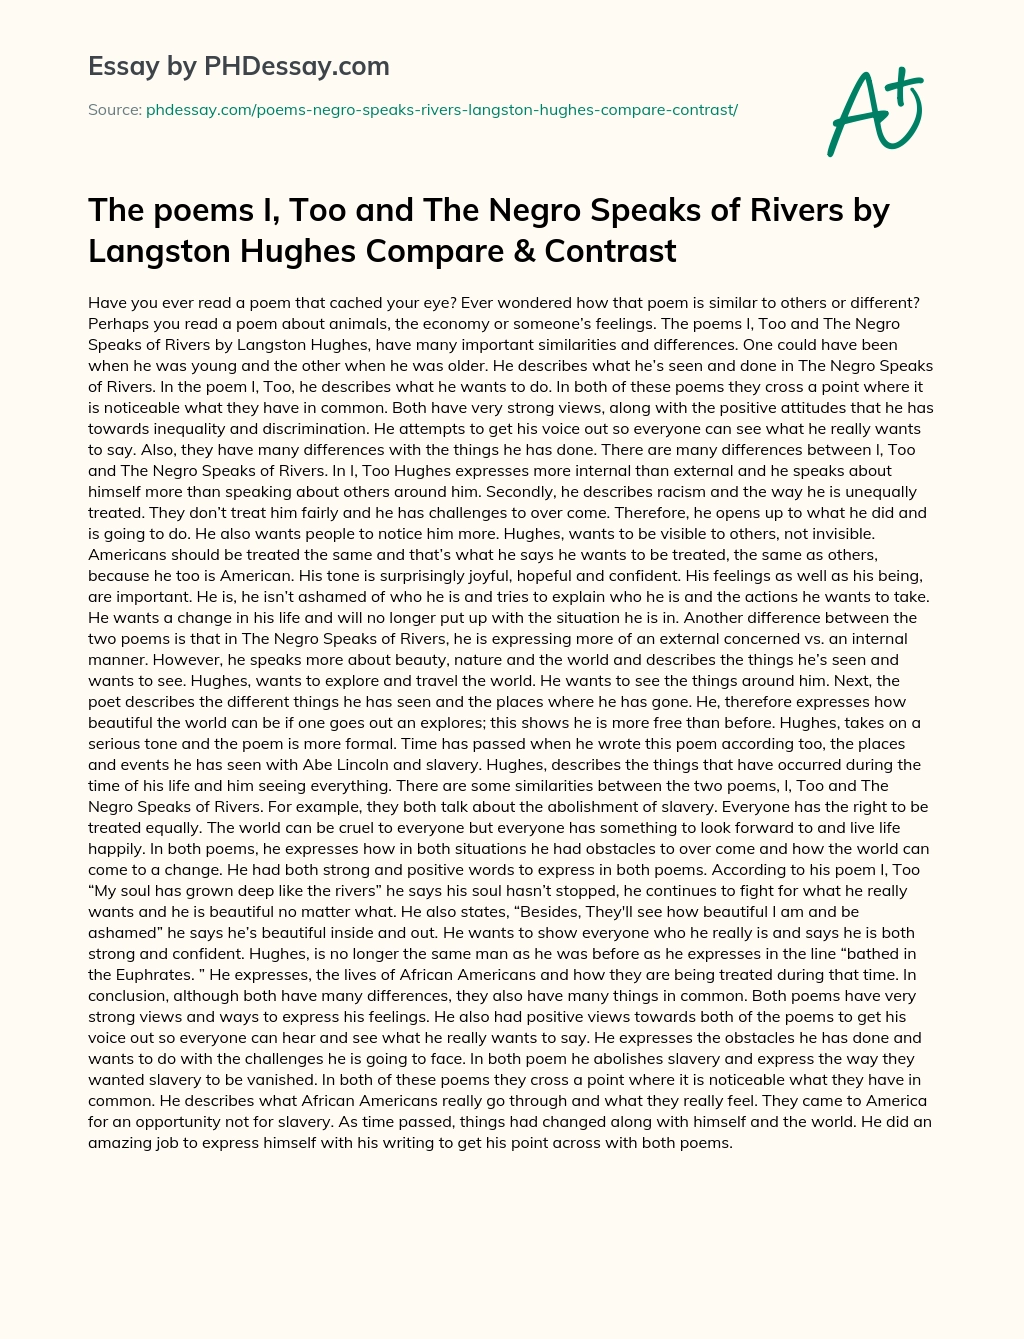 The poems I, Too and The Negro Speaks of Rivers by Langston Hughes Compare & Contrast essay